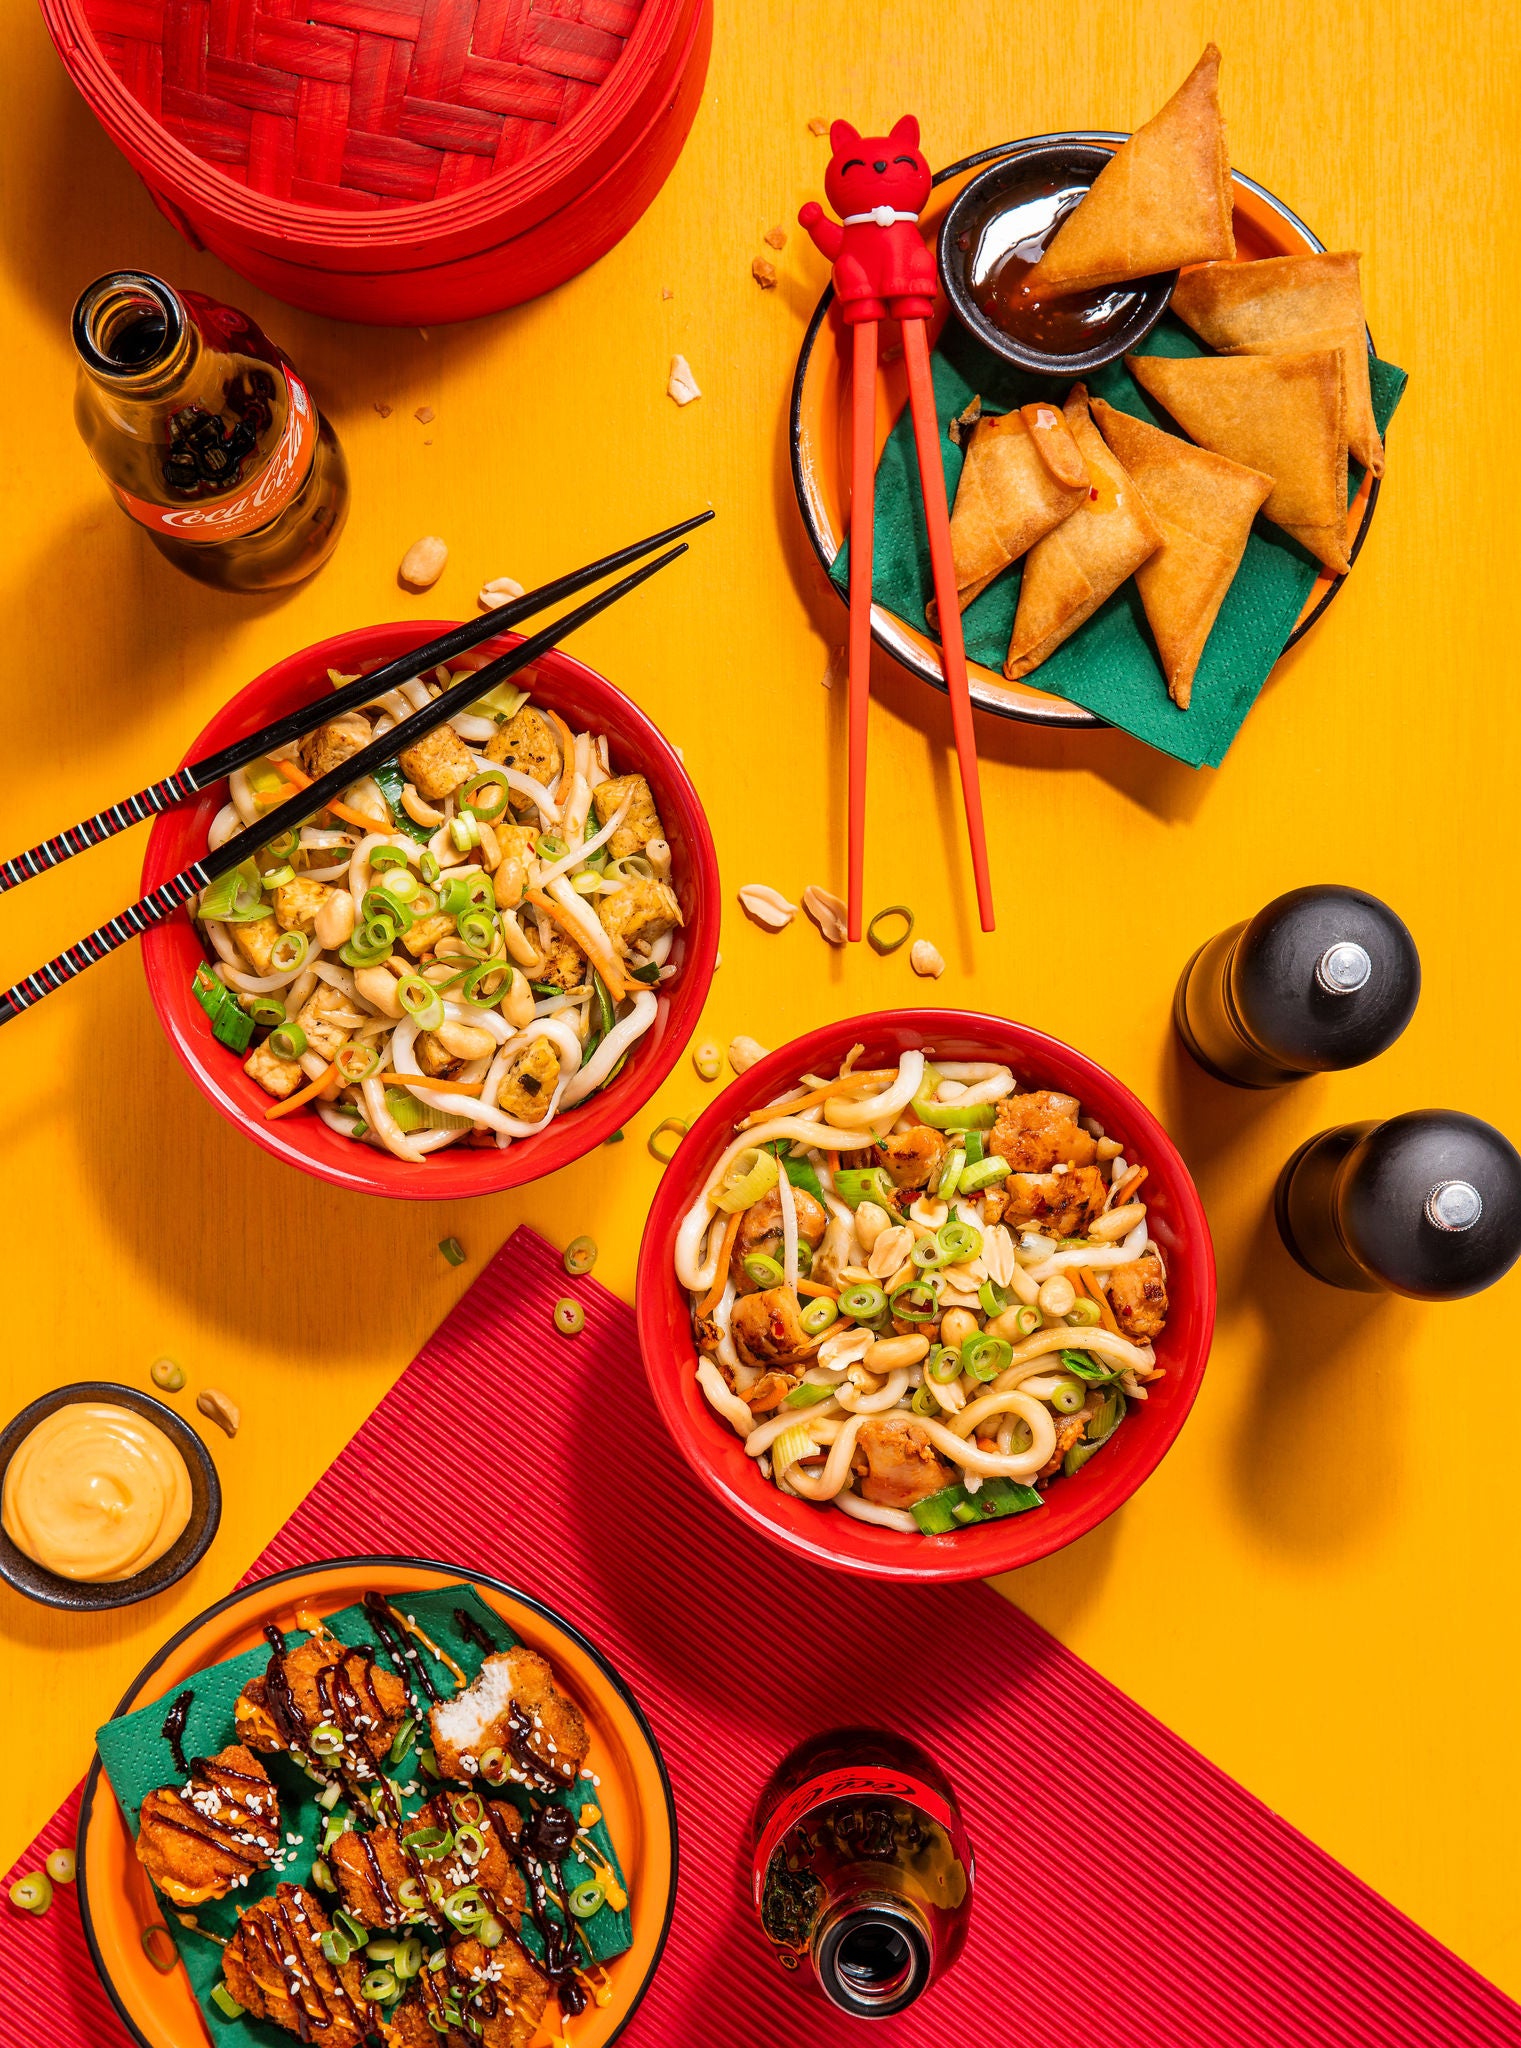 LIU LIU's delicious dishes, Chicken Noodles and Samosas.